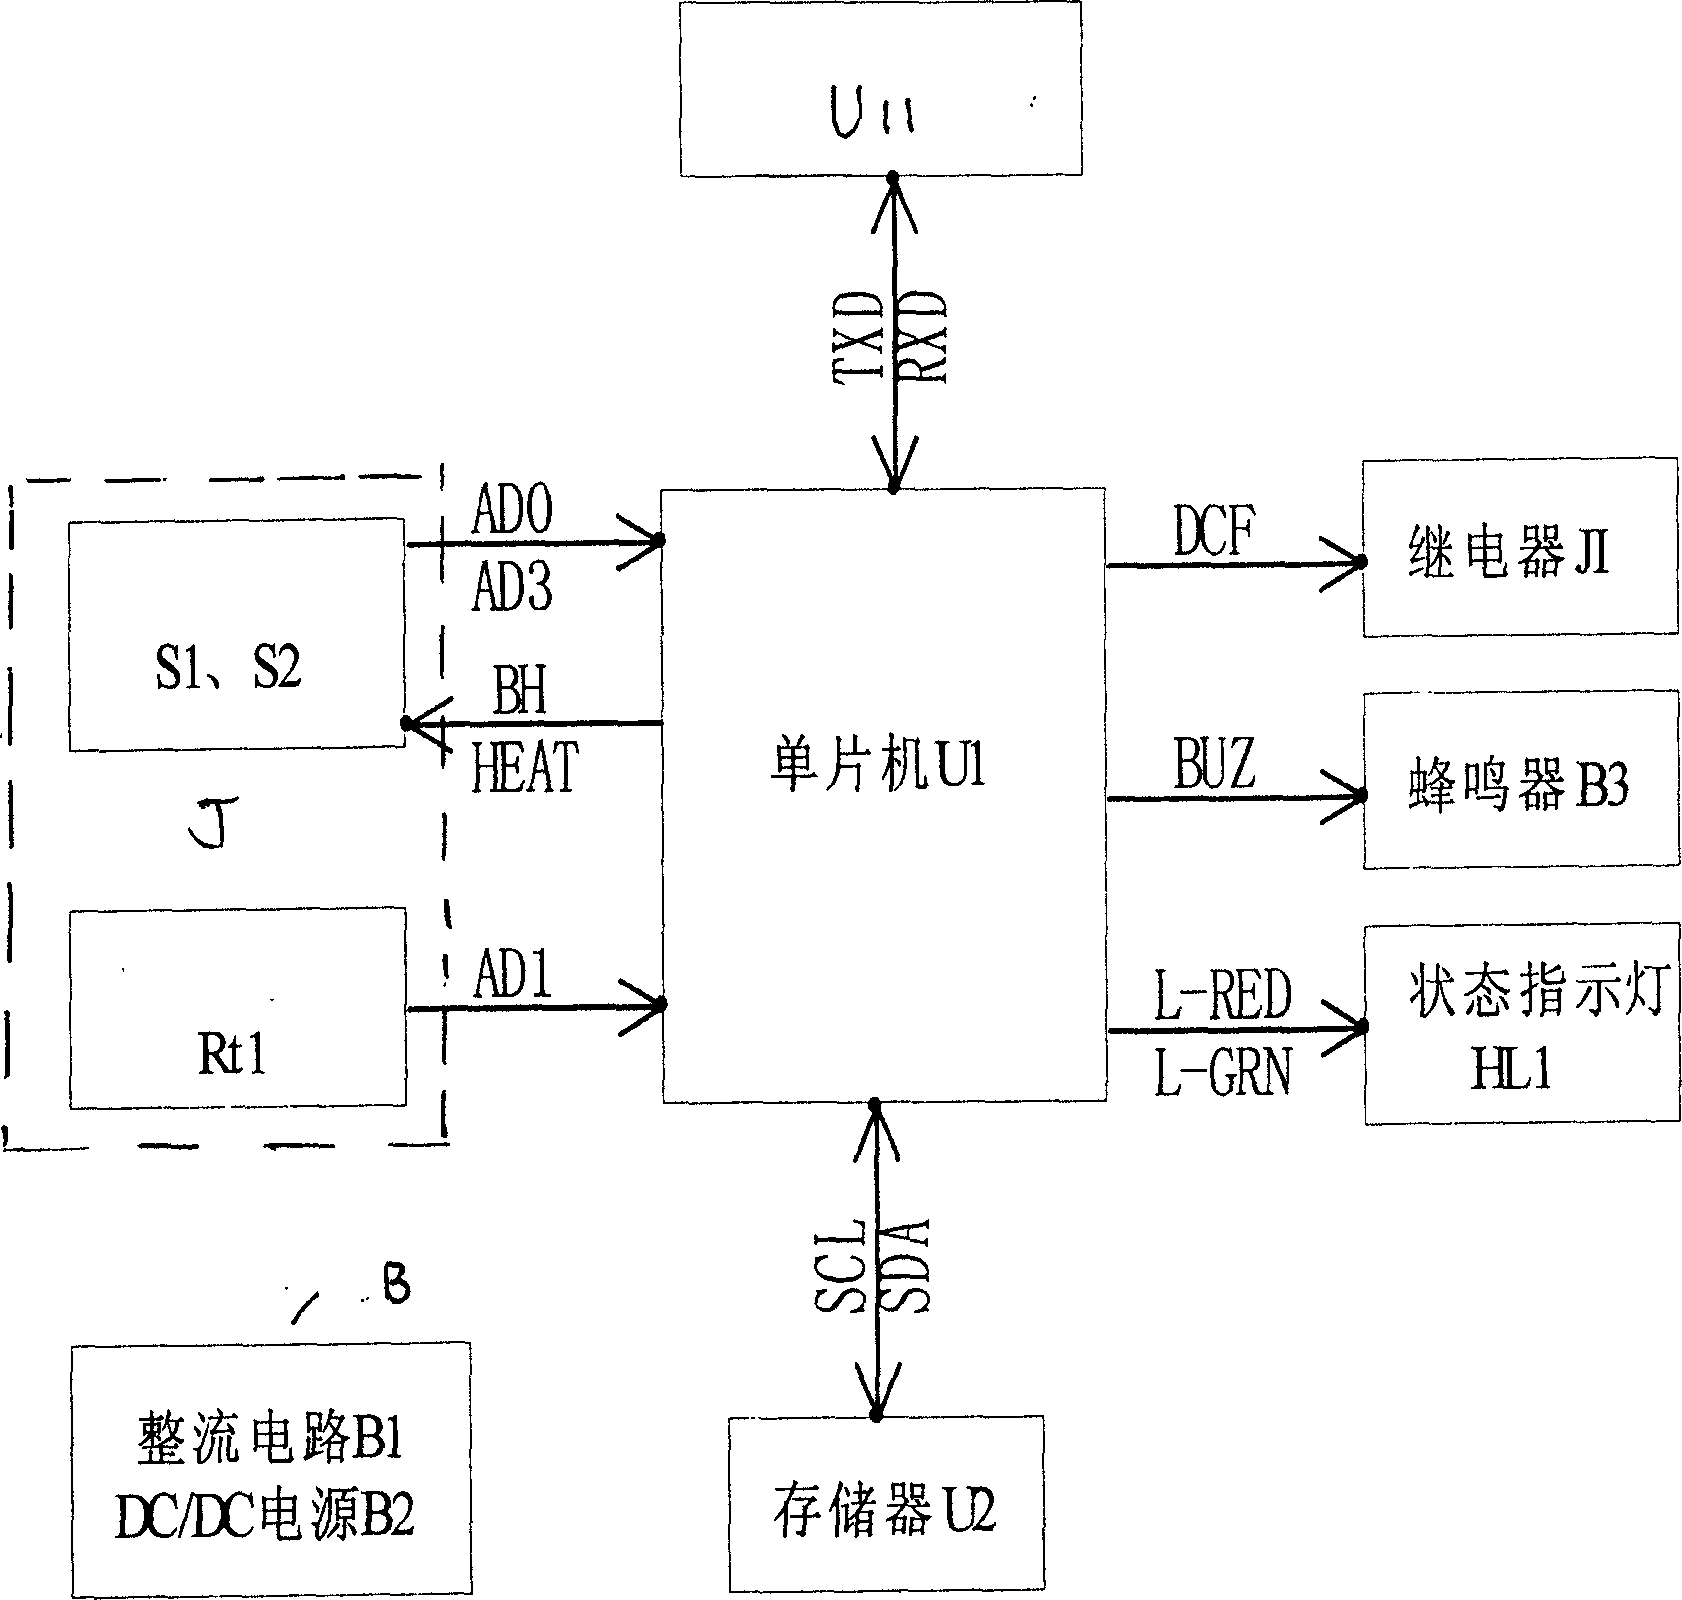 Alarm with data recording device for detecting combustible gas